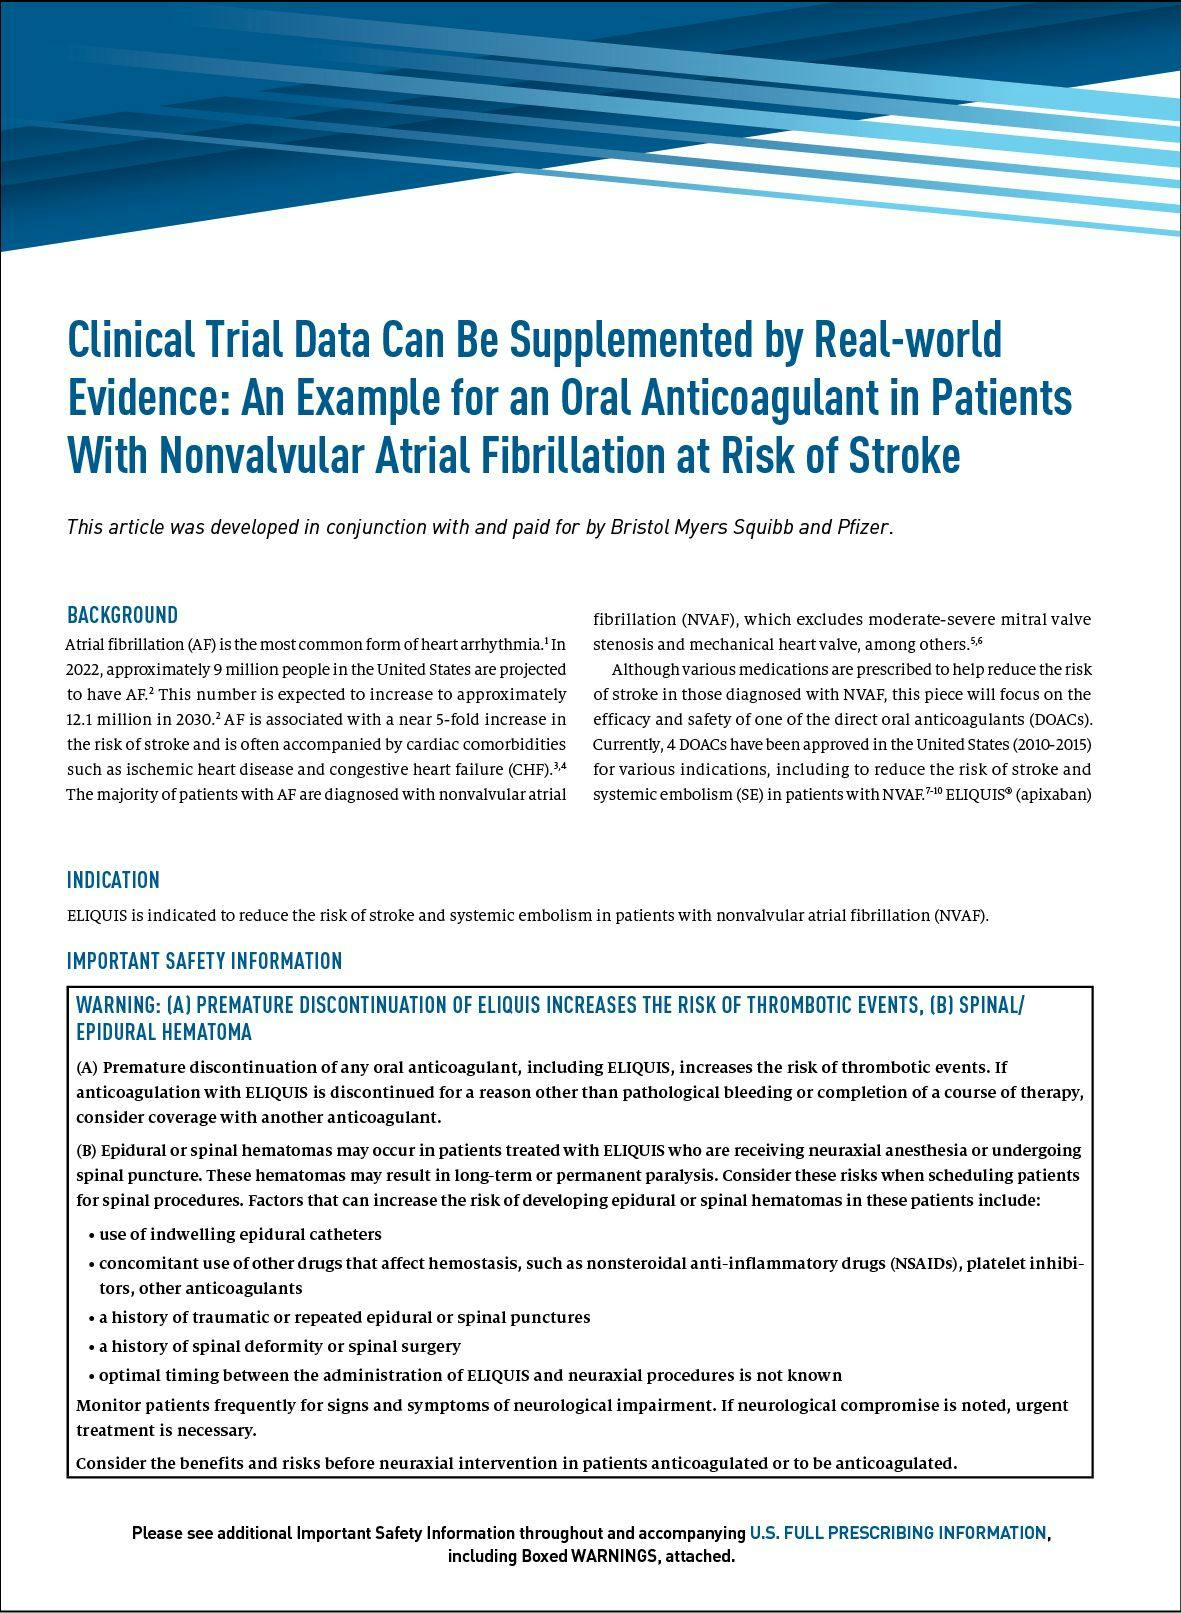 Clinical Trial Data Can Be Supplemented by Real-World Evidence: An Example for an Oral Anticoagulant in Patients With Nonvalvular Atrial Fibrillation at Risk of Stroke